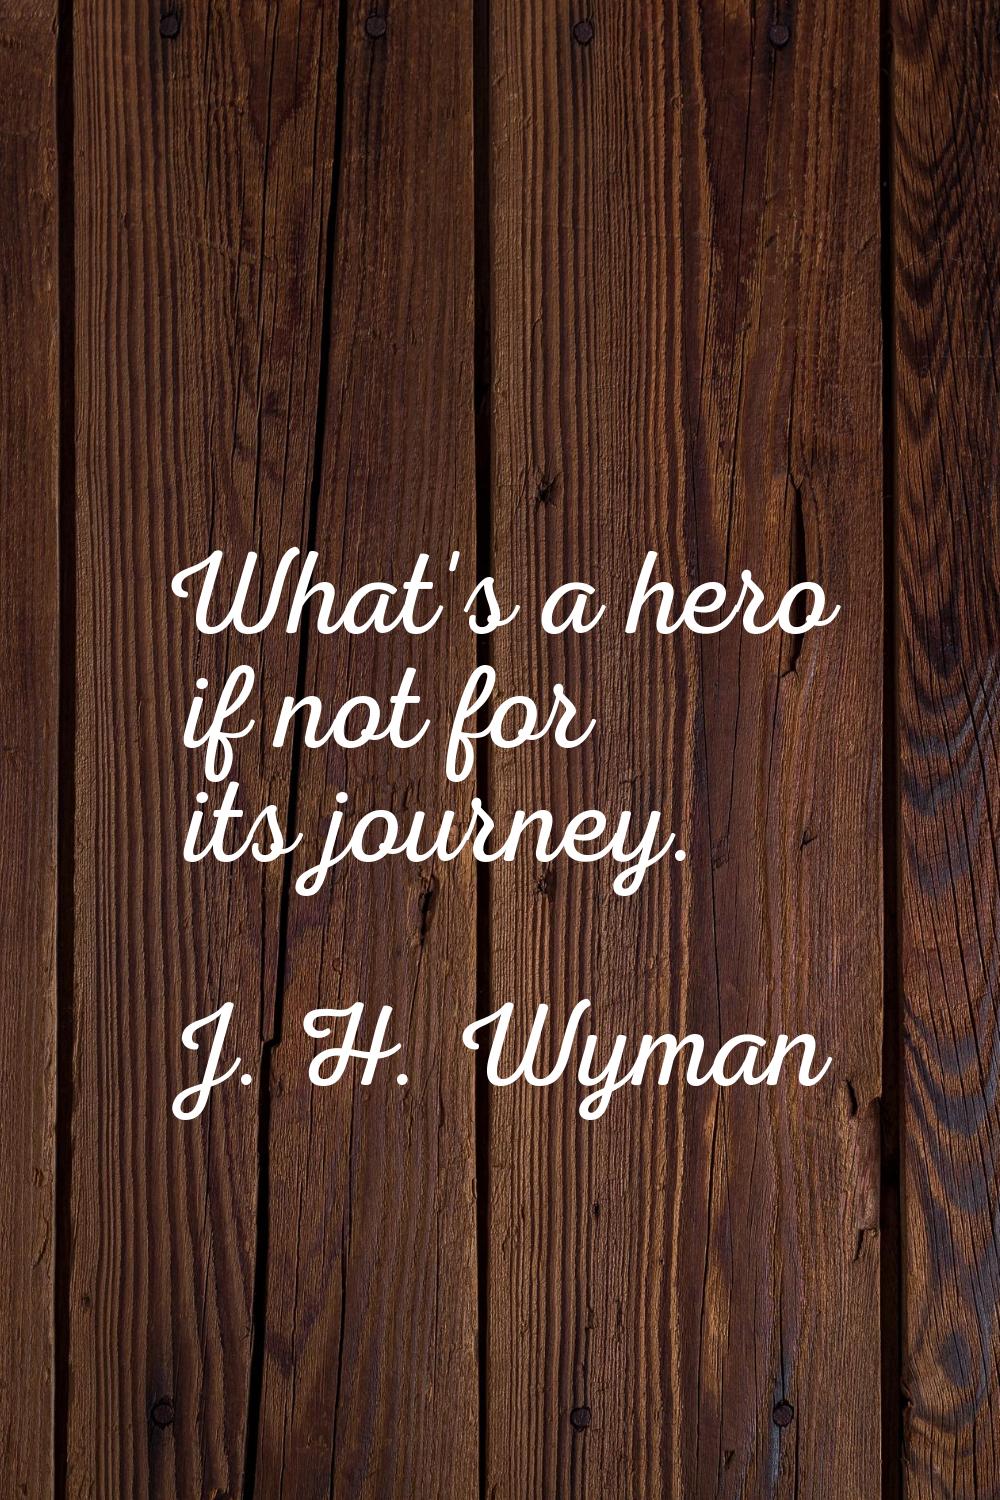 What's a hero if not for its journey.